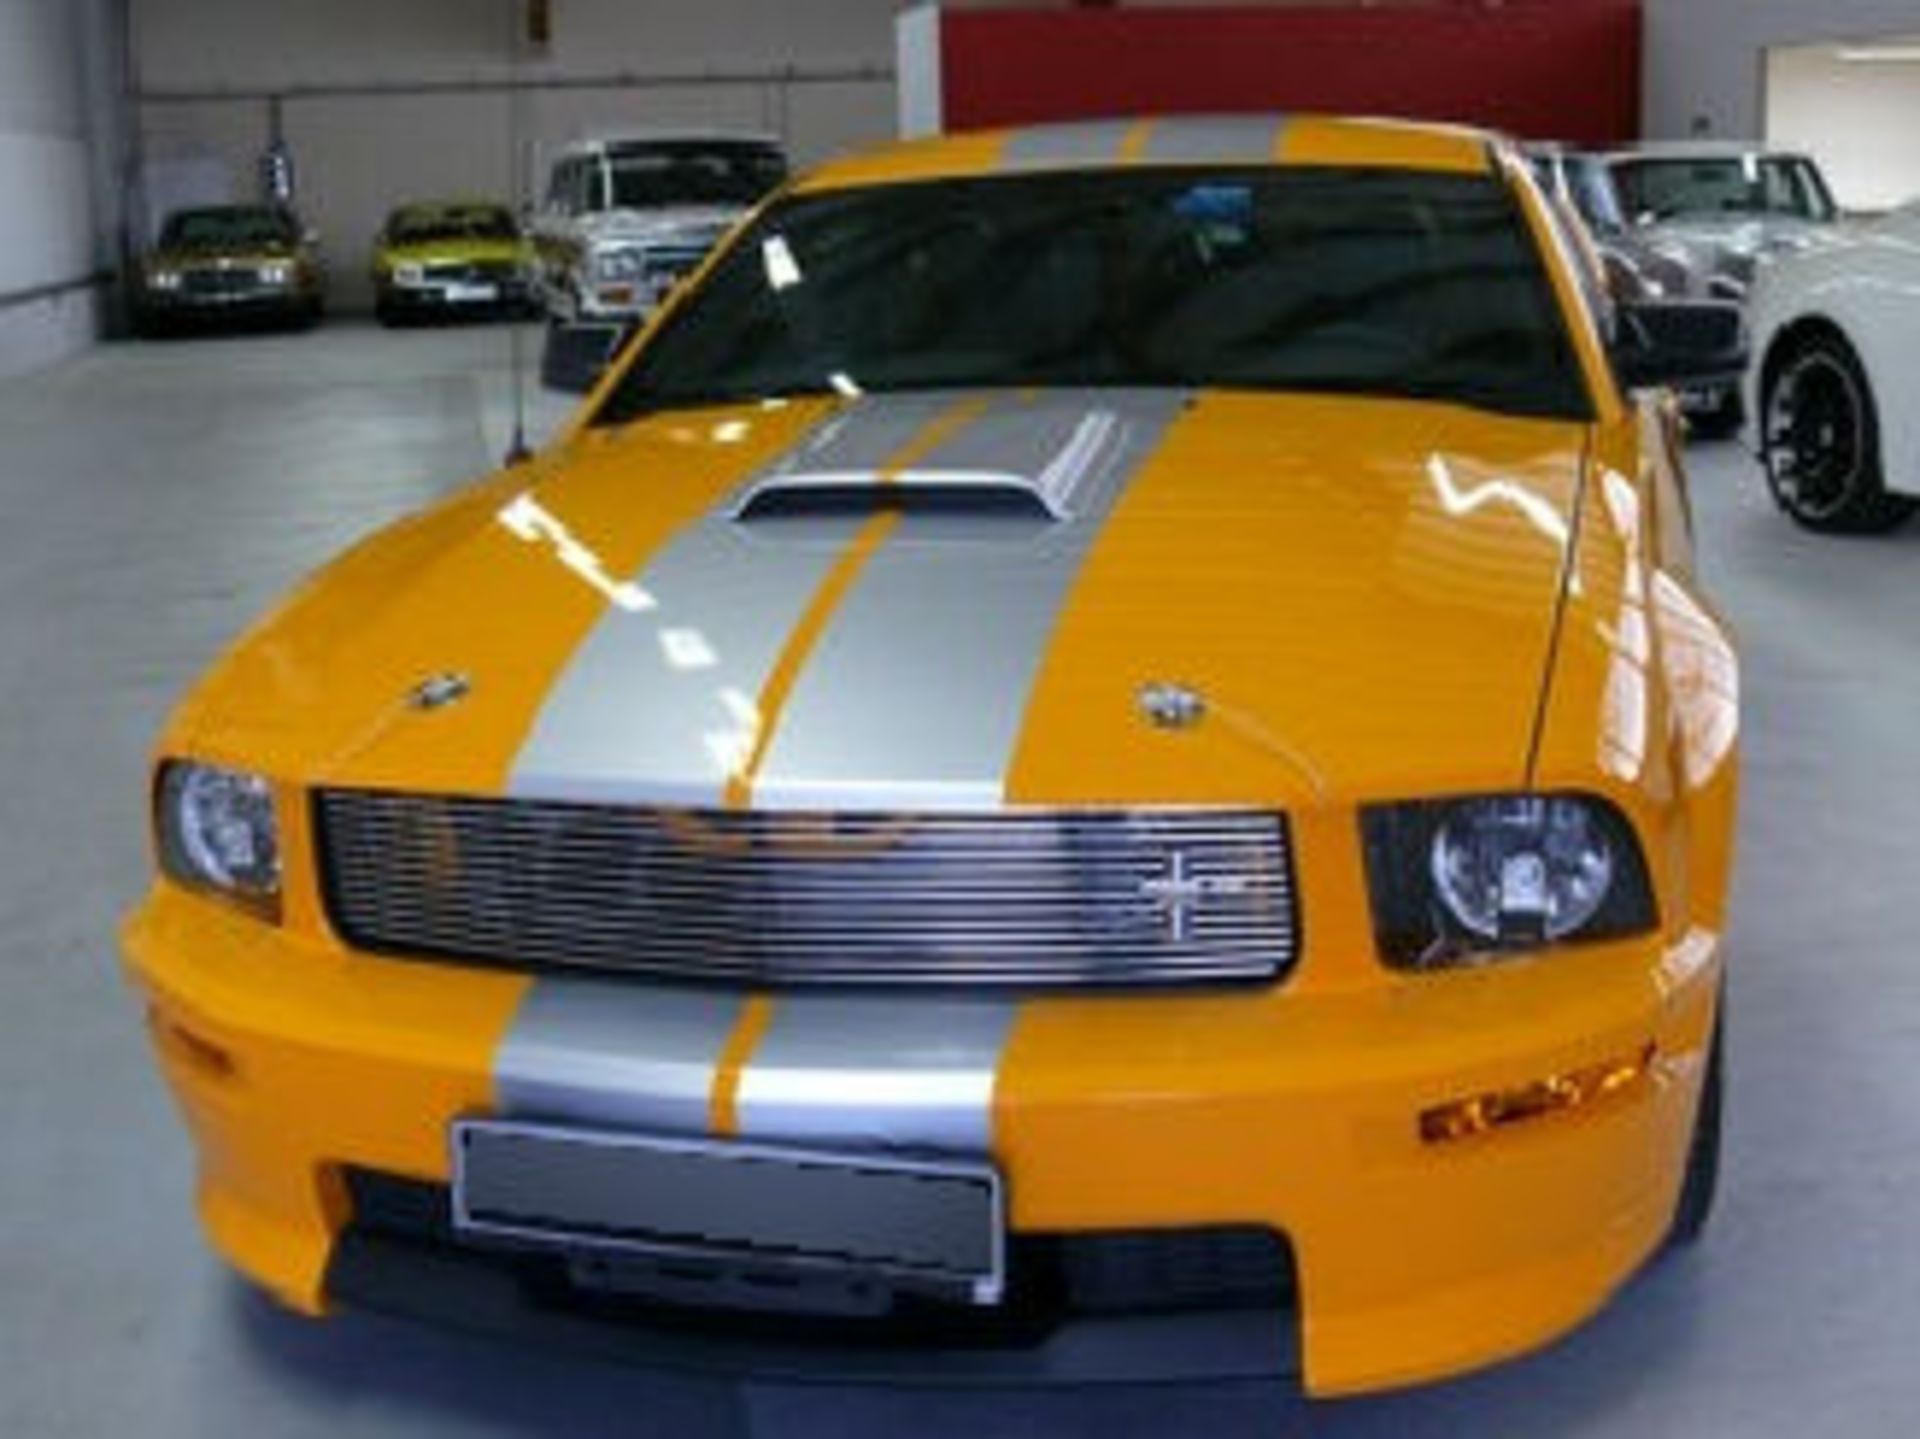 Limited Edition Supercharged 2008 Shelby Ford Mustang GT-C - 2136 Miles - No VAT on the hammer - Image 58 of 64